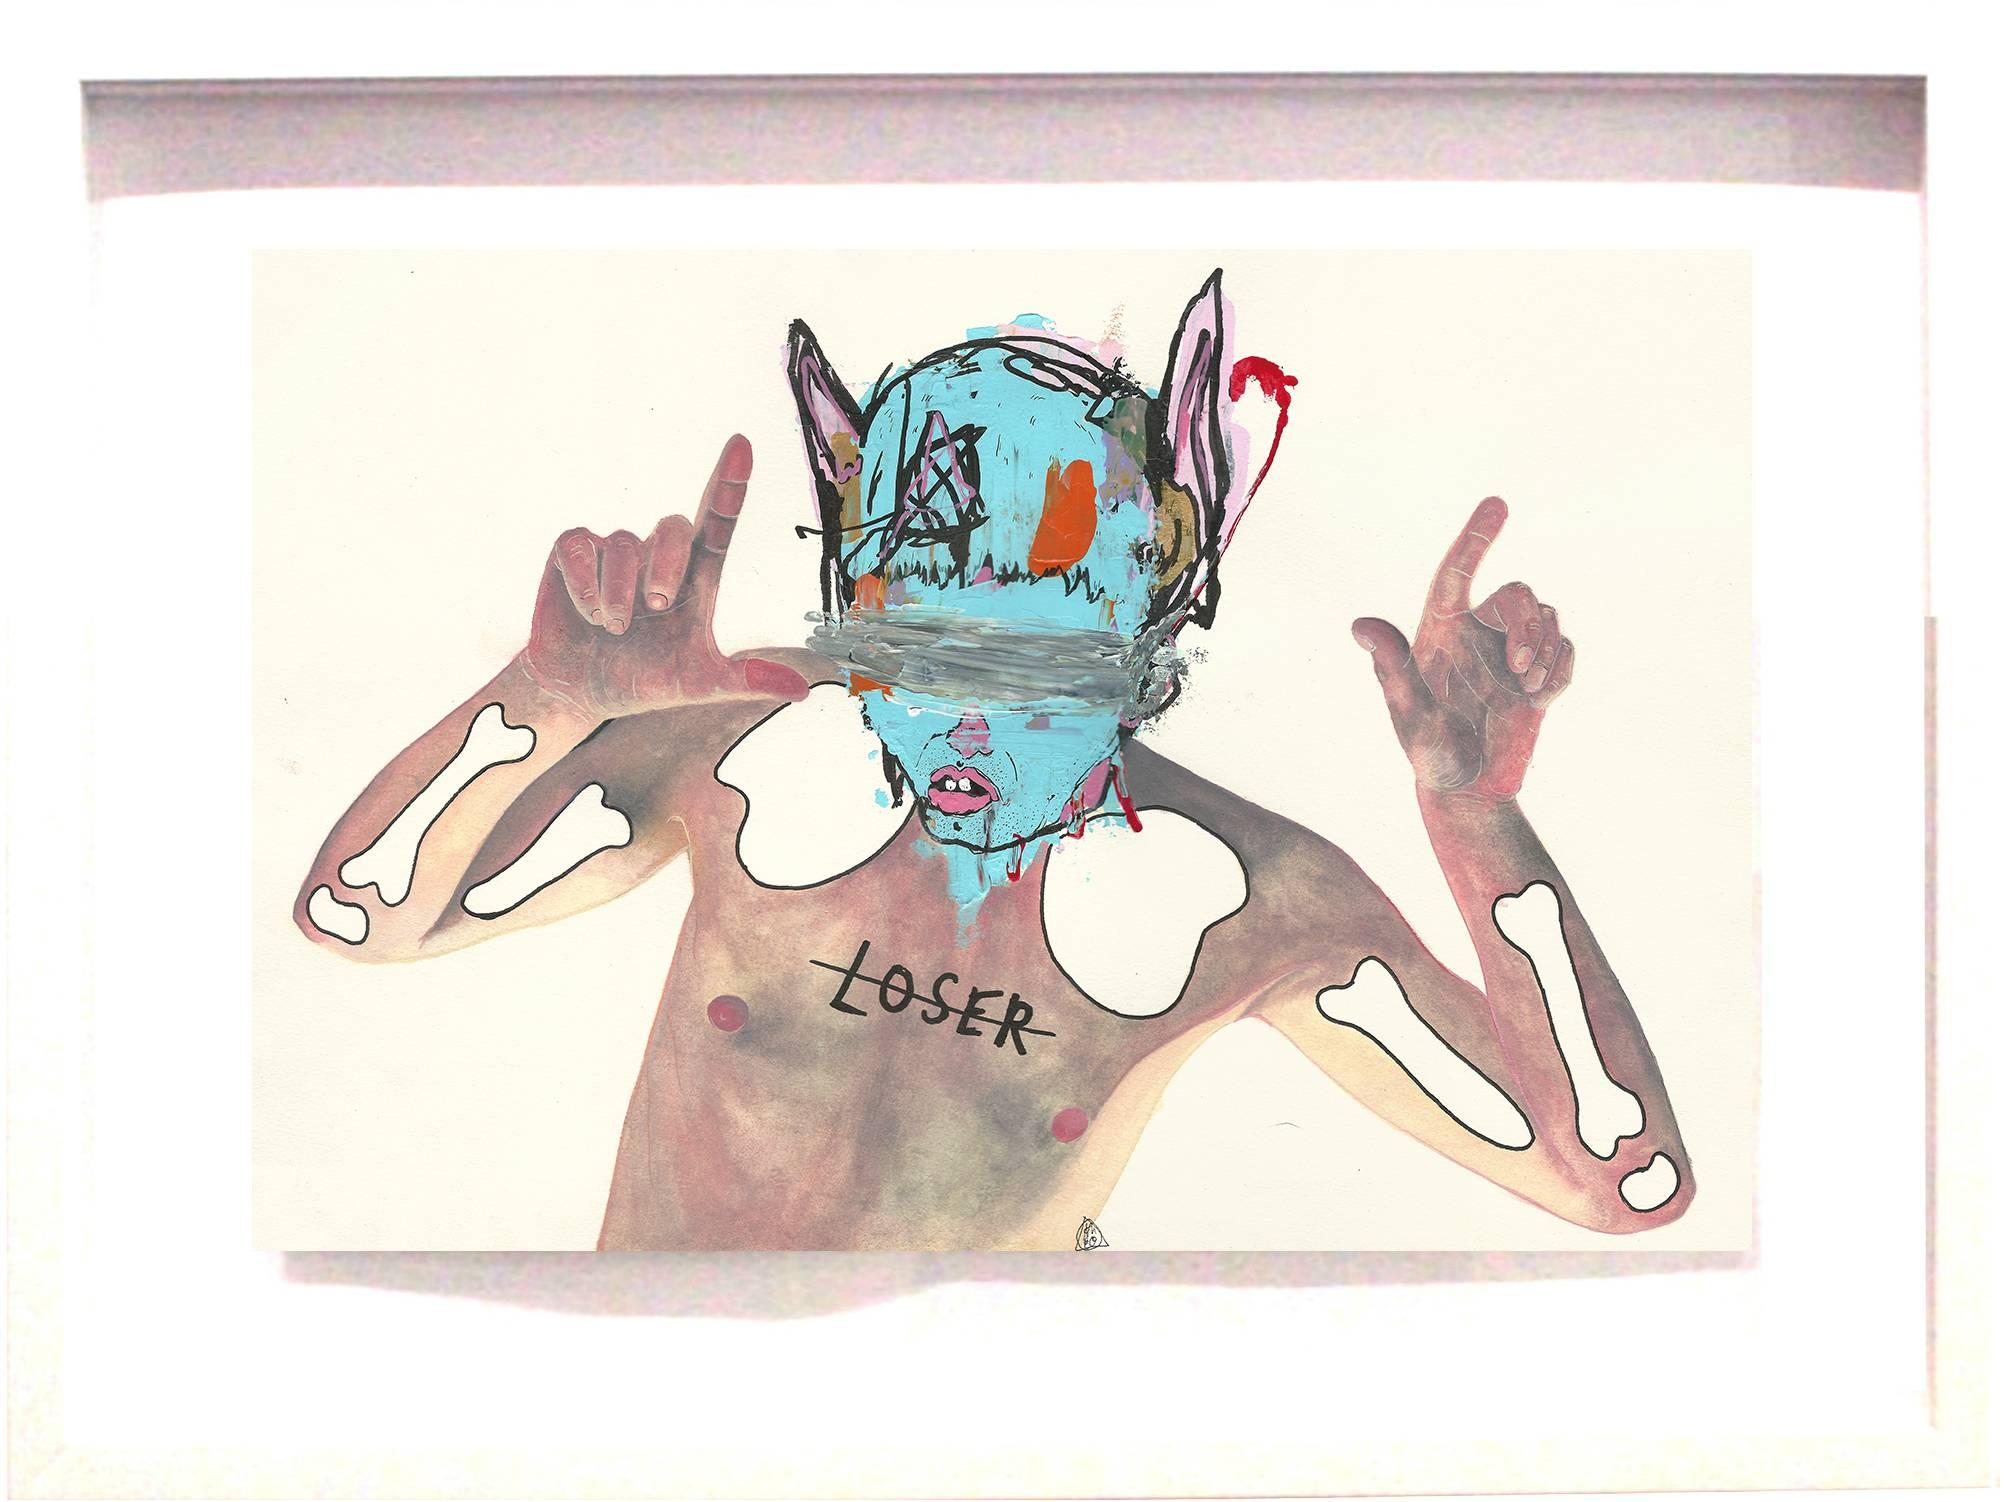 Loser - original watercolor on paper by Theohuxxx - Contemporary Painting by THEOHUXXX